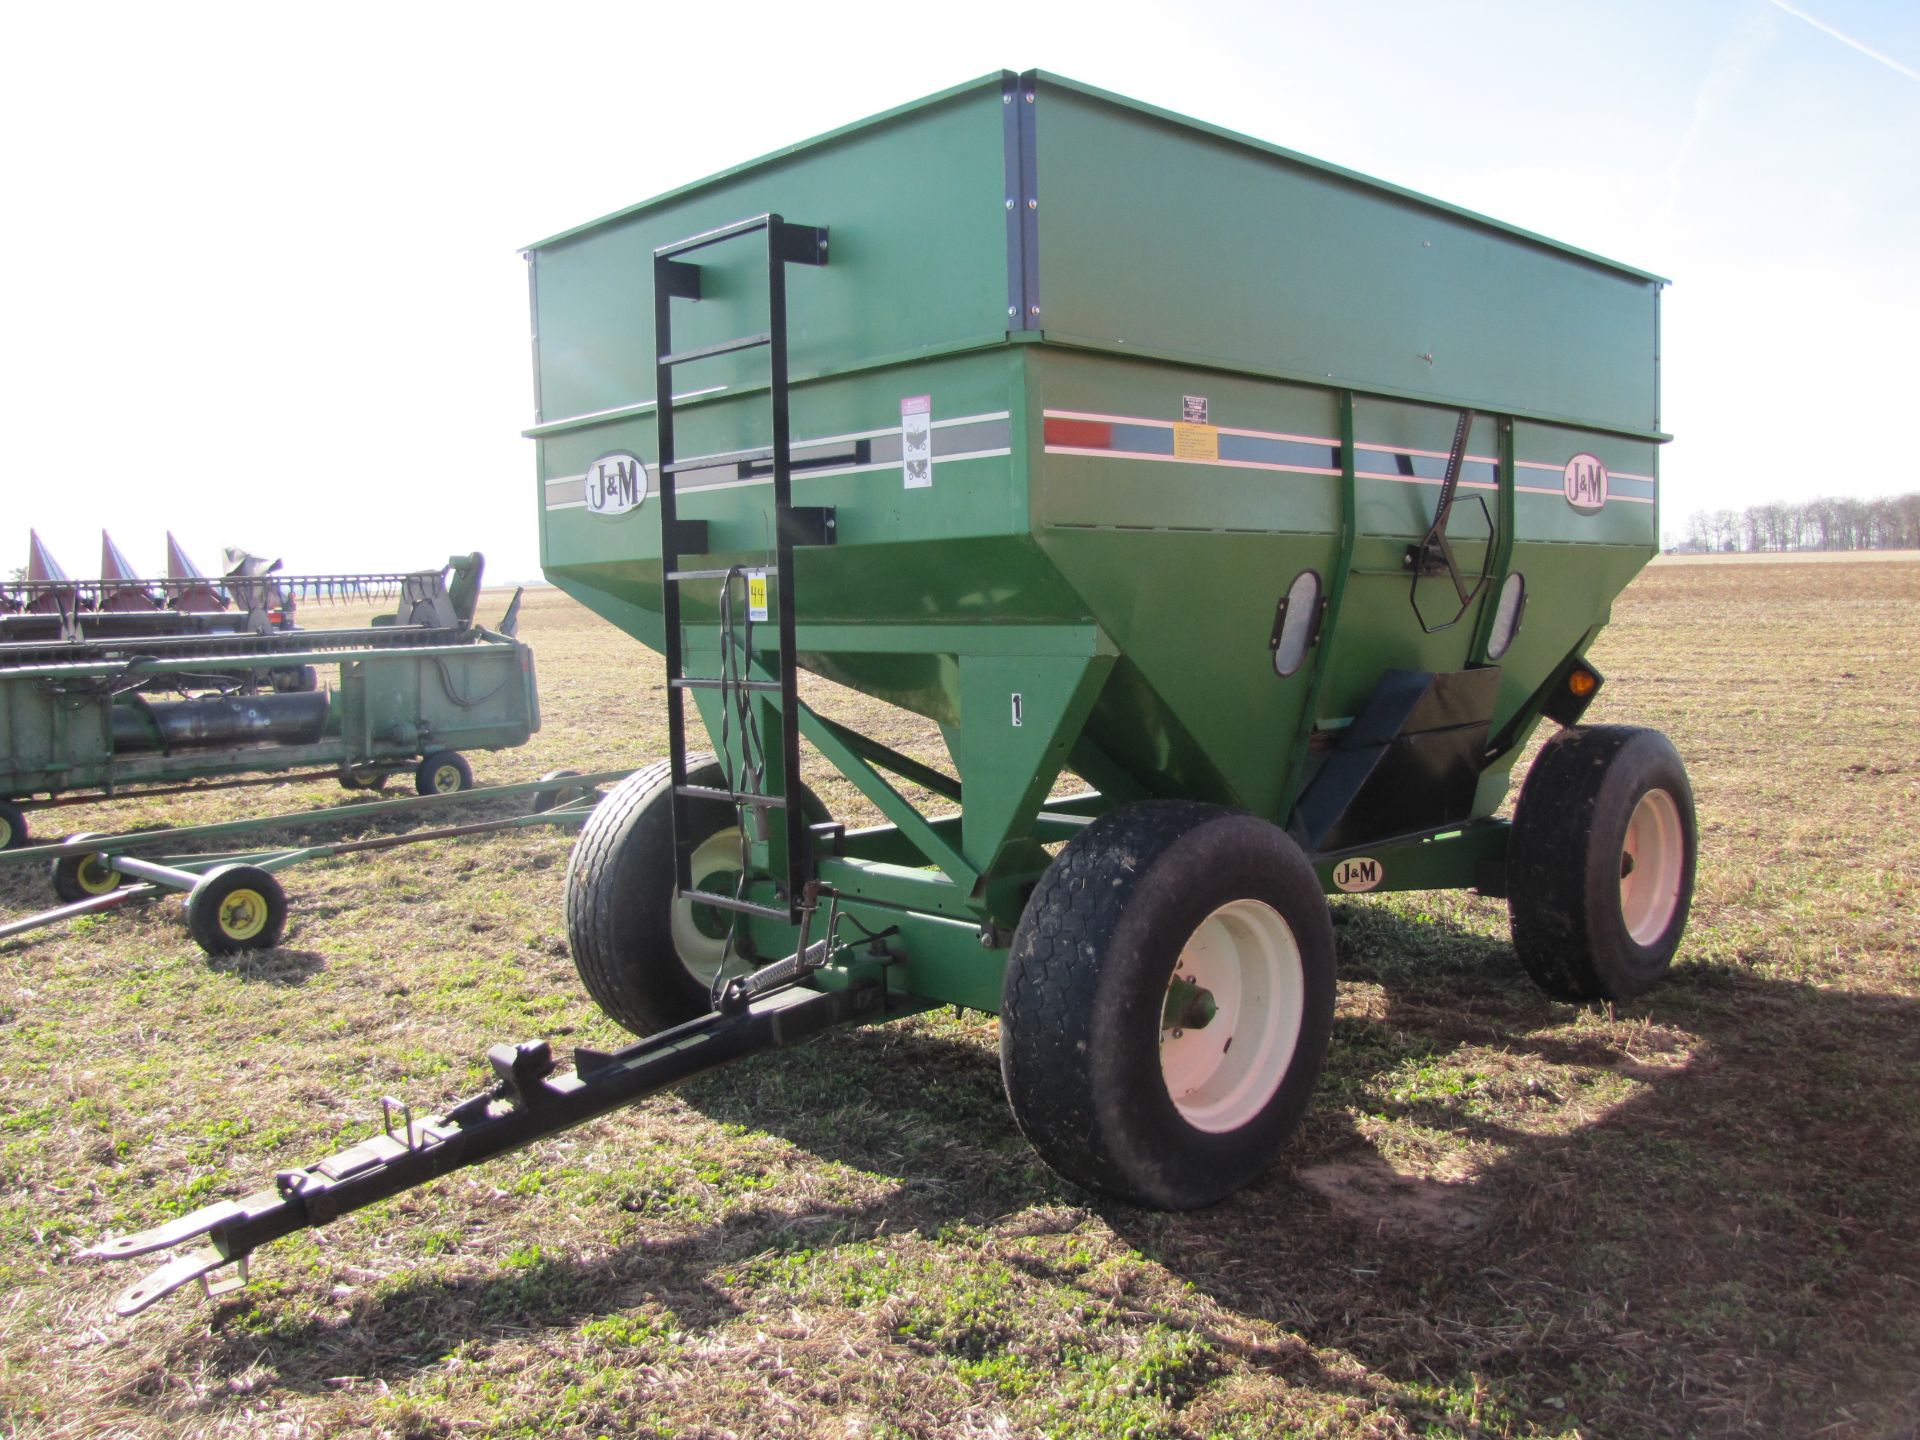 J & M 385 gravity bed wagon, site windows, brakes, light package, 385/65 R 22.5 tires - Image 3 of 18